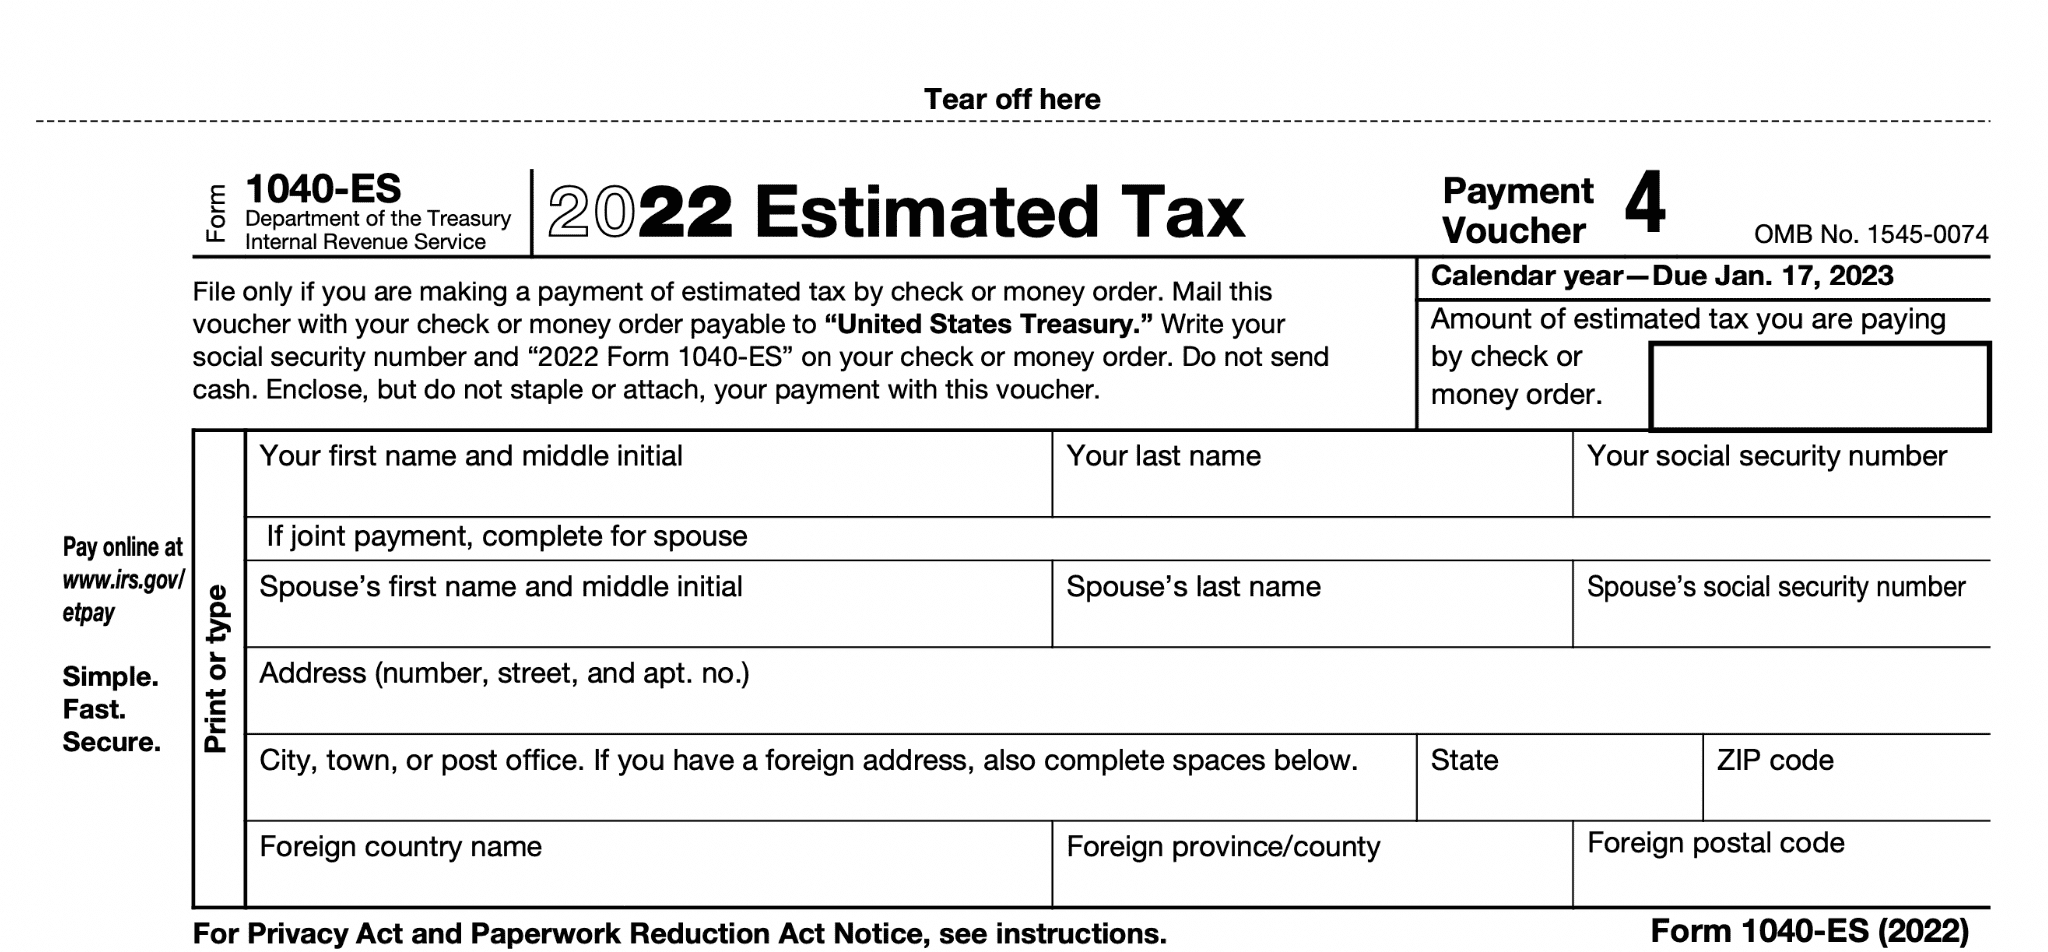 Image of a payment voucher for estimated taxes (Form 1040-ES) for the year 2022. Use it to make a payment by check or money order.